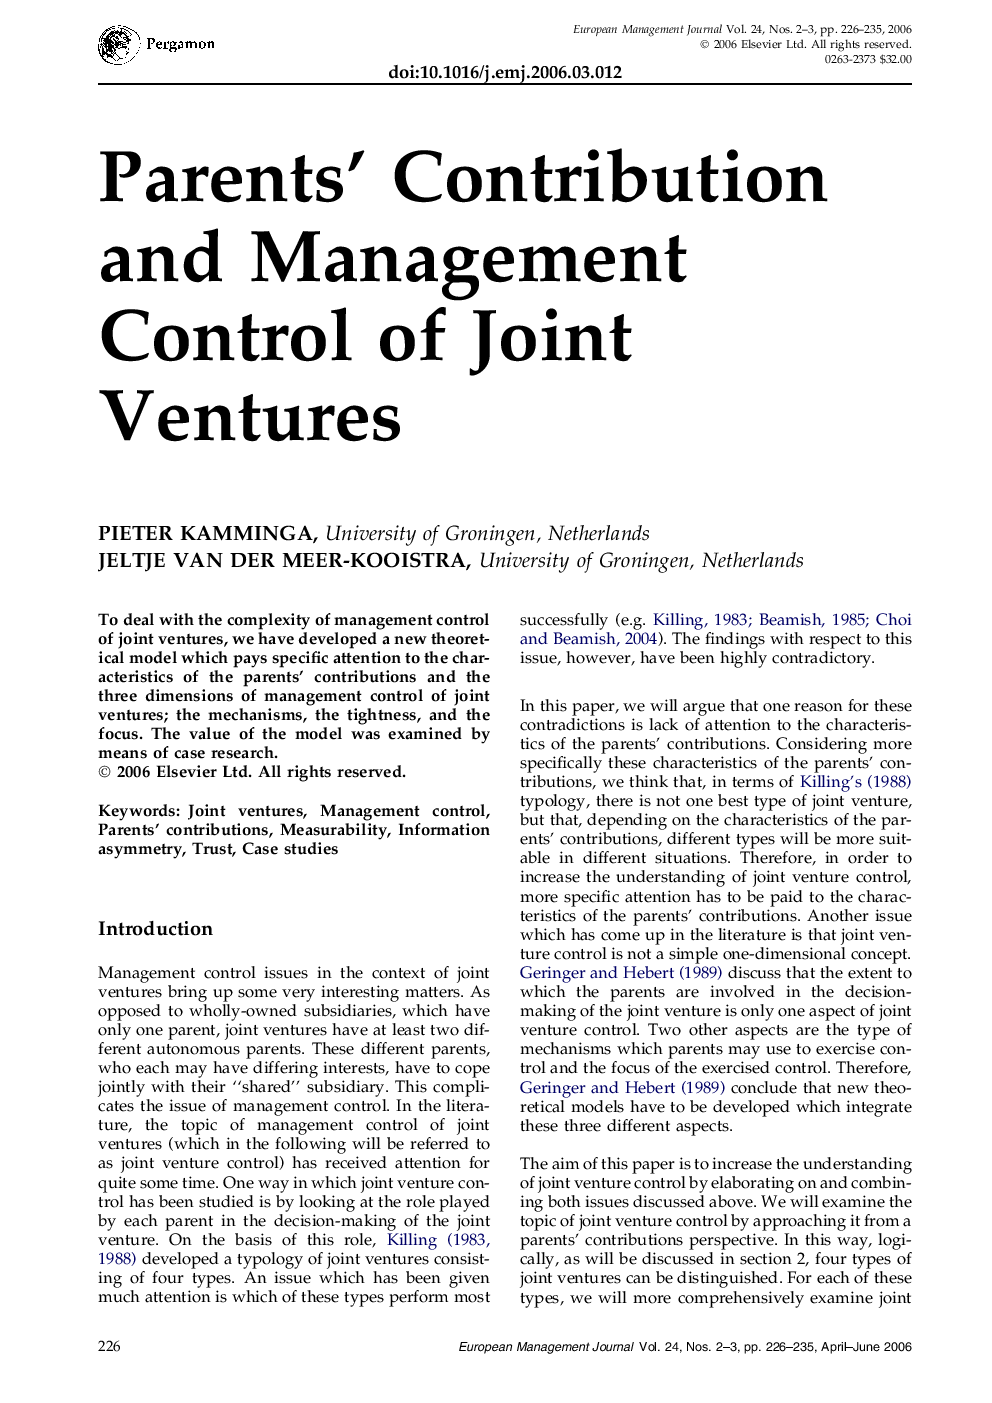 Parents’ Contribution and Management Control of Joint Ventures